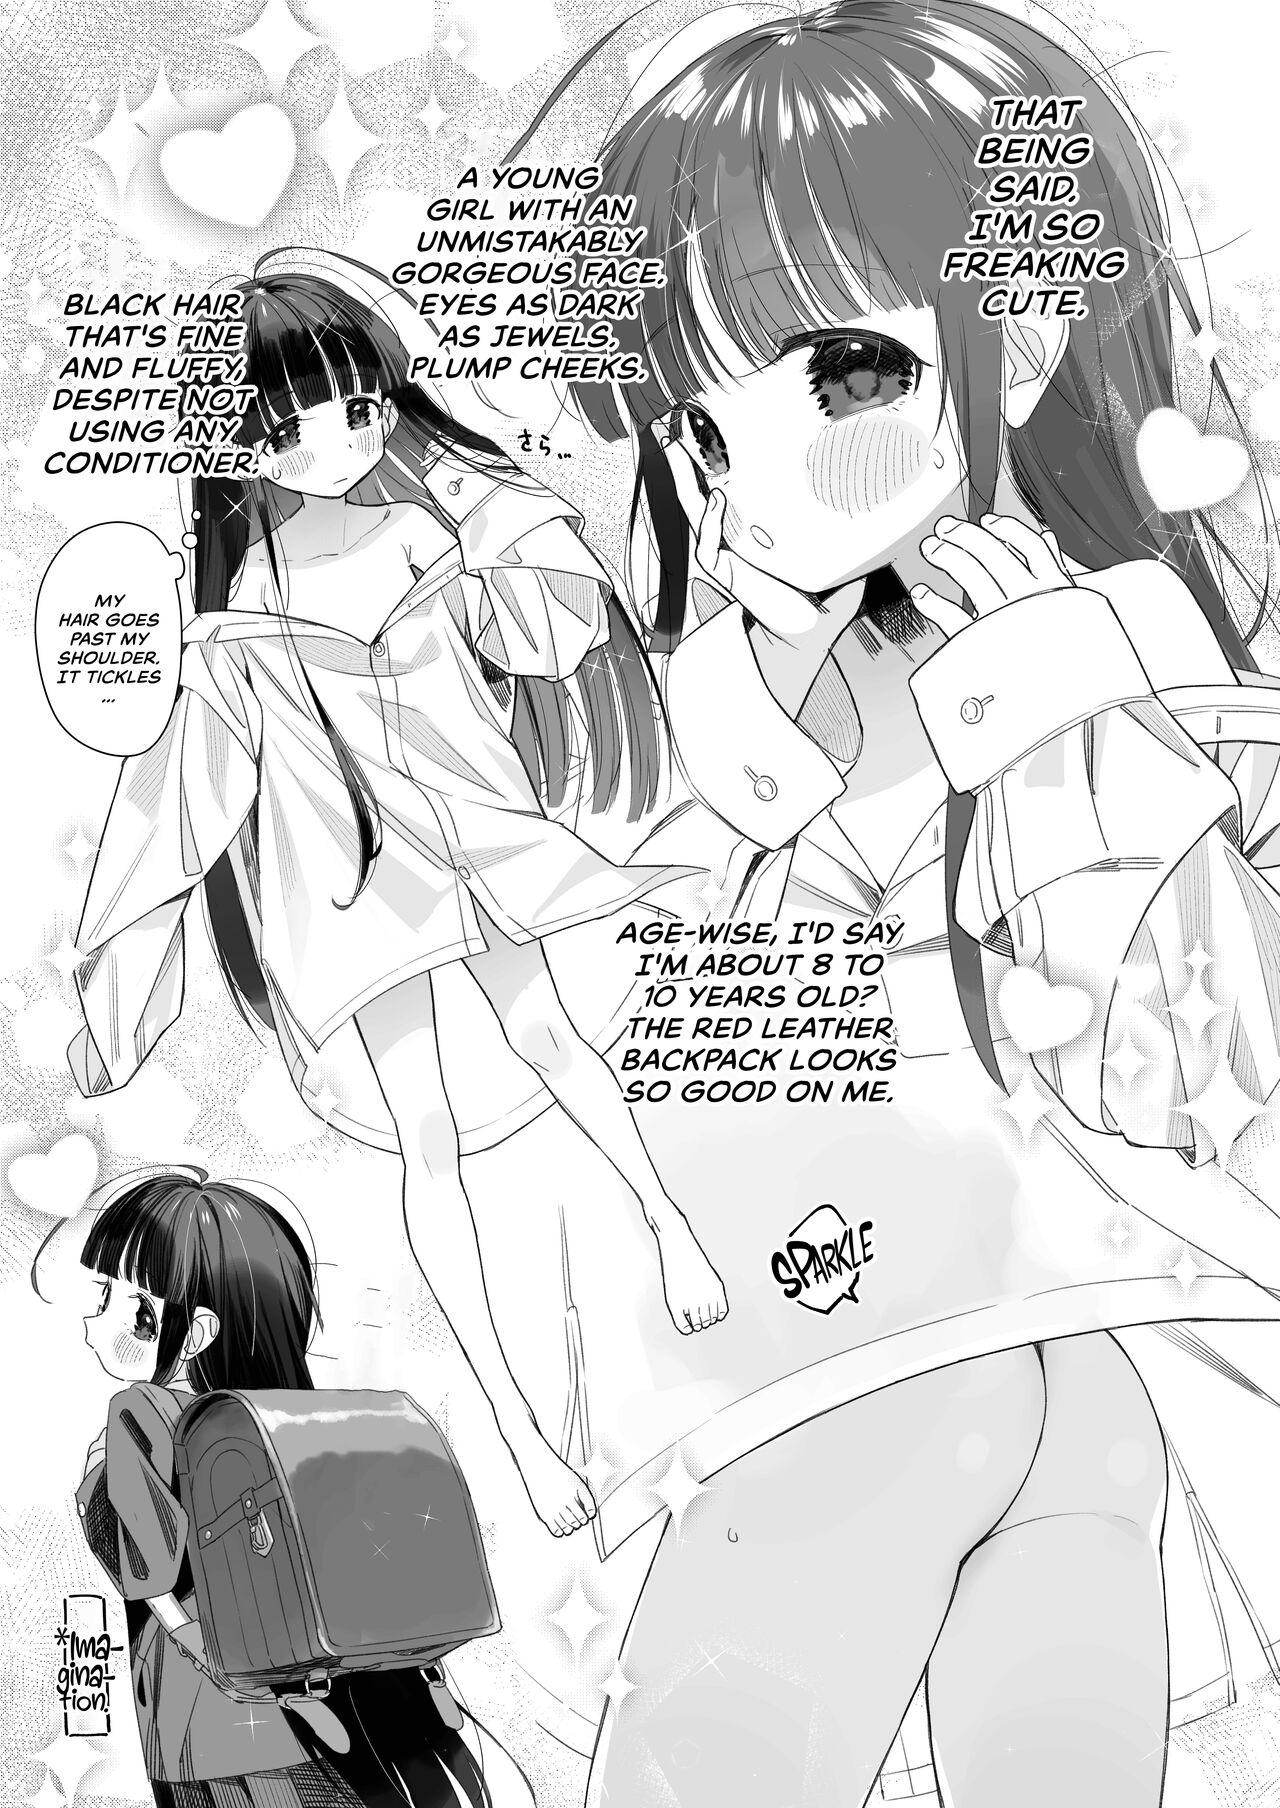 Argentina [Asunaro Neat. (Ronna)] TS Loli Oji-san no Bouken Onanie Hen | The Adventures of an Old Man Who Was Gender-Swapped Into a Loli ~Masturbation Chapter~ [English] [CulturedCommissions] [Digital] - Original Facial Cumshot - Page 6